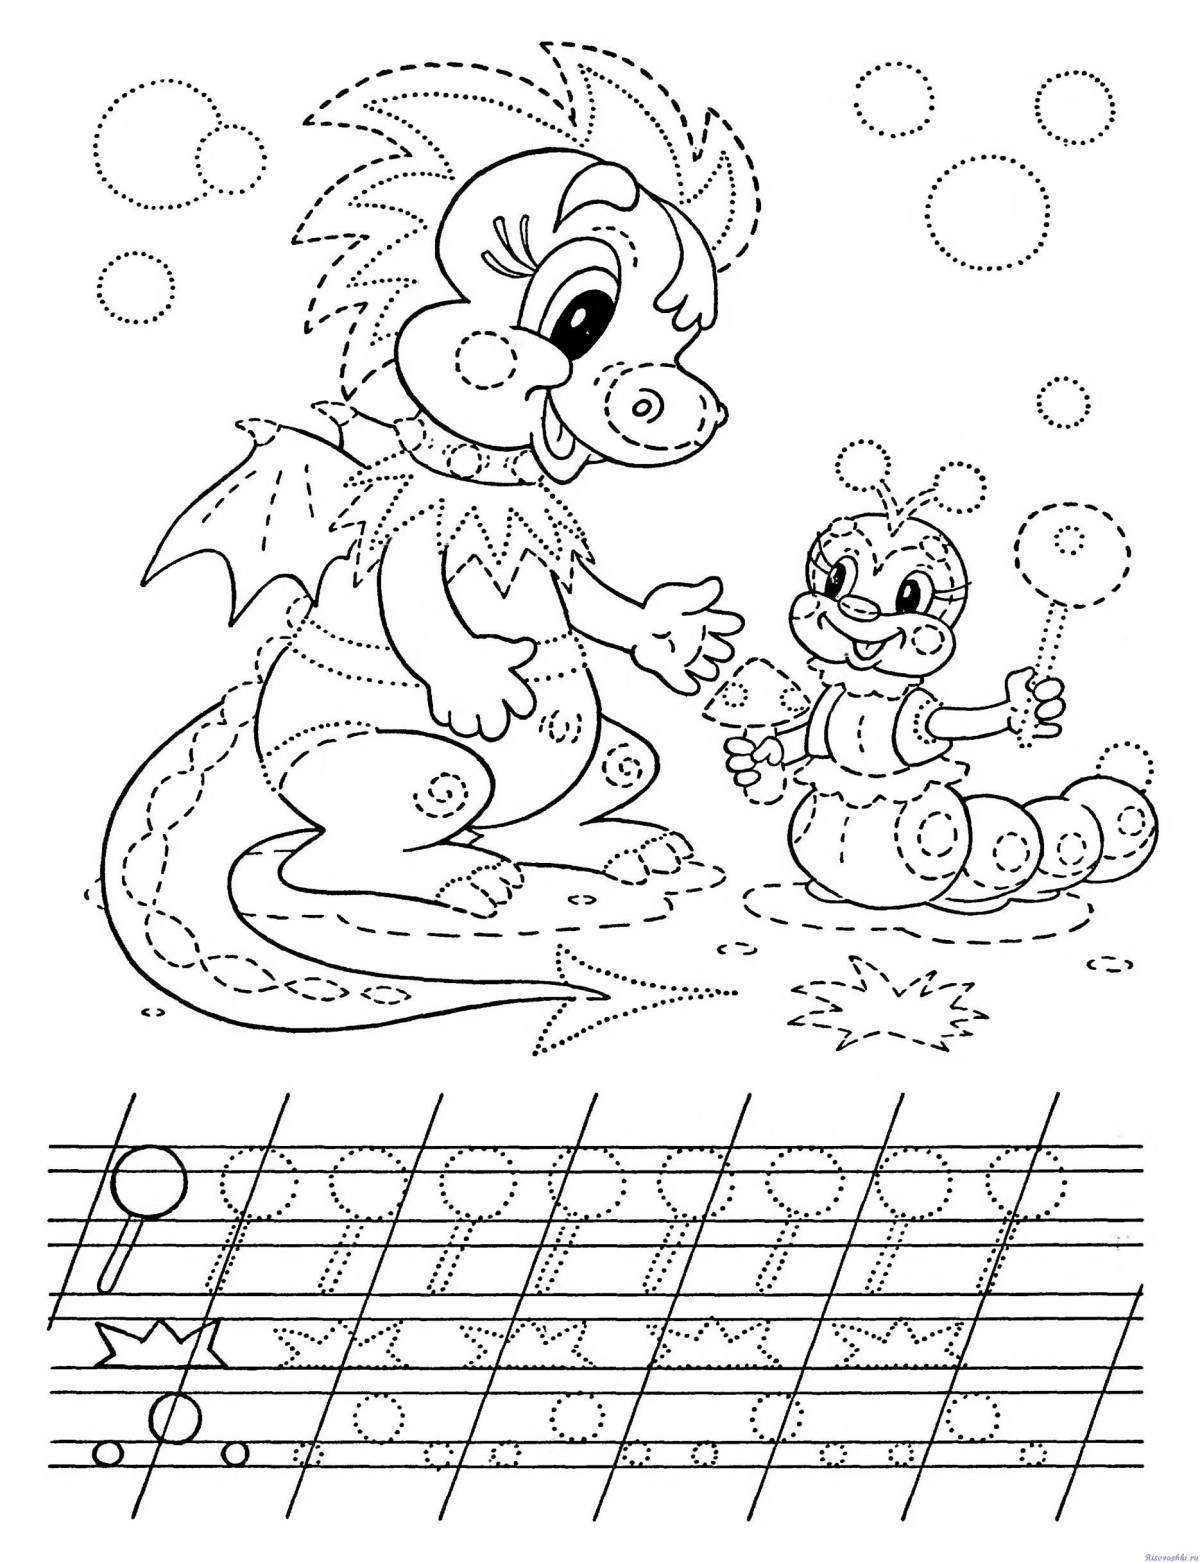 Colorful coloring book for preschoolers 6-7 years old